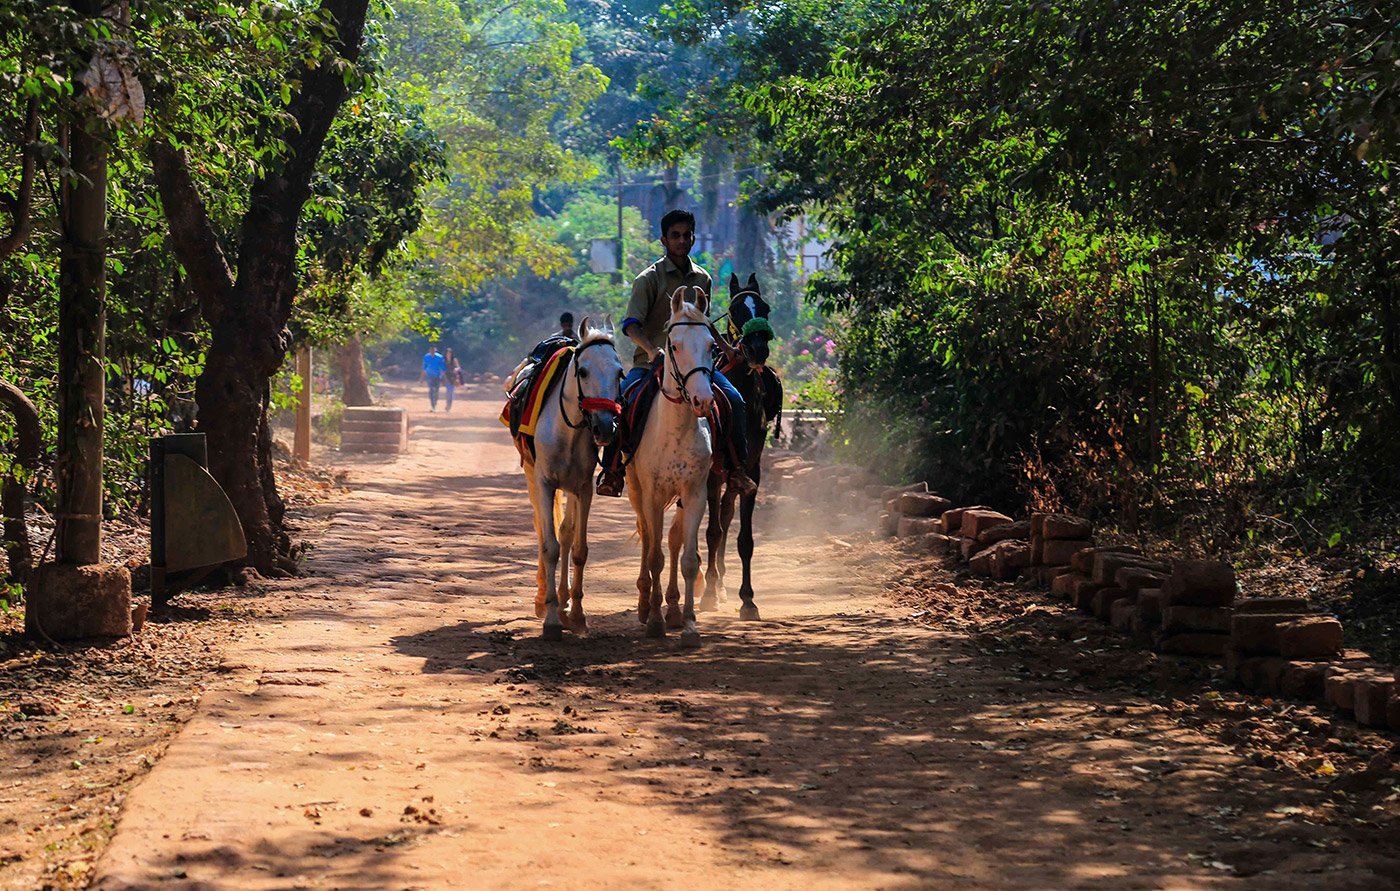 The keepers of the 460 horses of this hill station in Maharashtra’s Raigad district walk or run upto 25 kilometres uphill every day through Matheran’s dusty soil, with horse-borne tourists